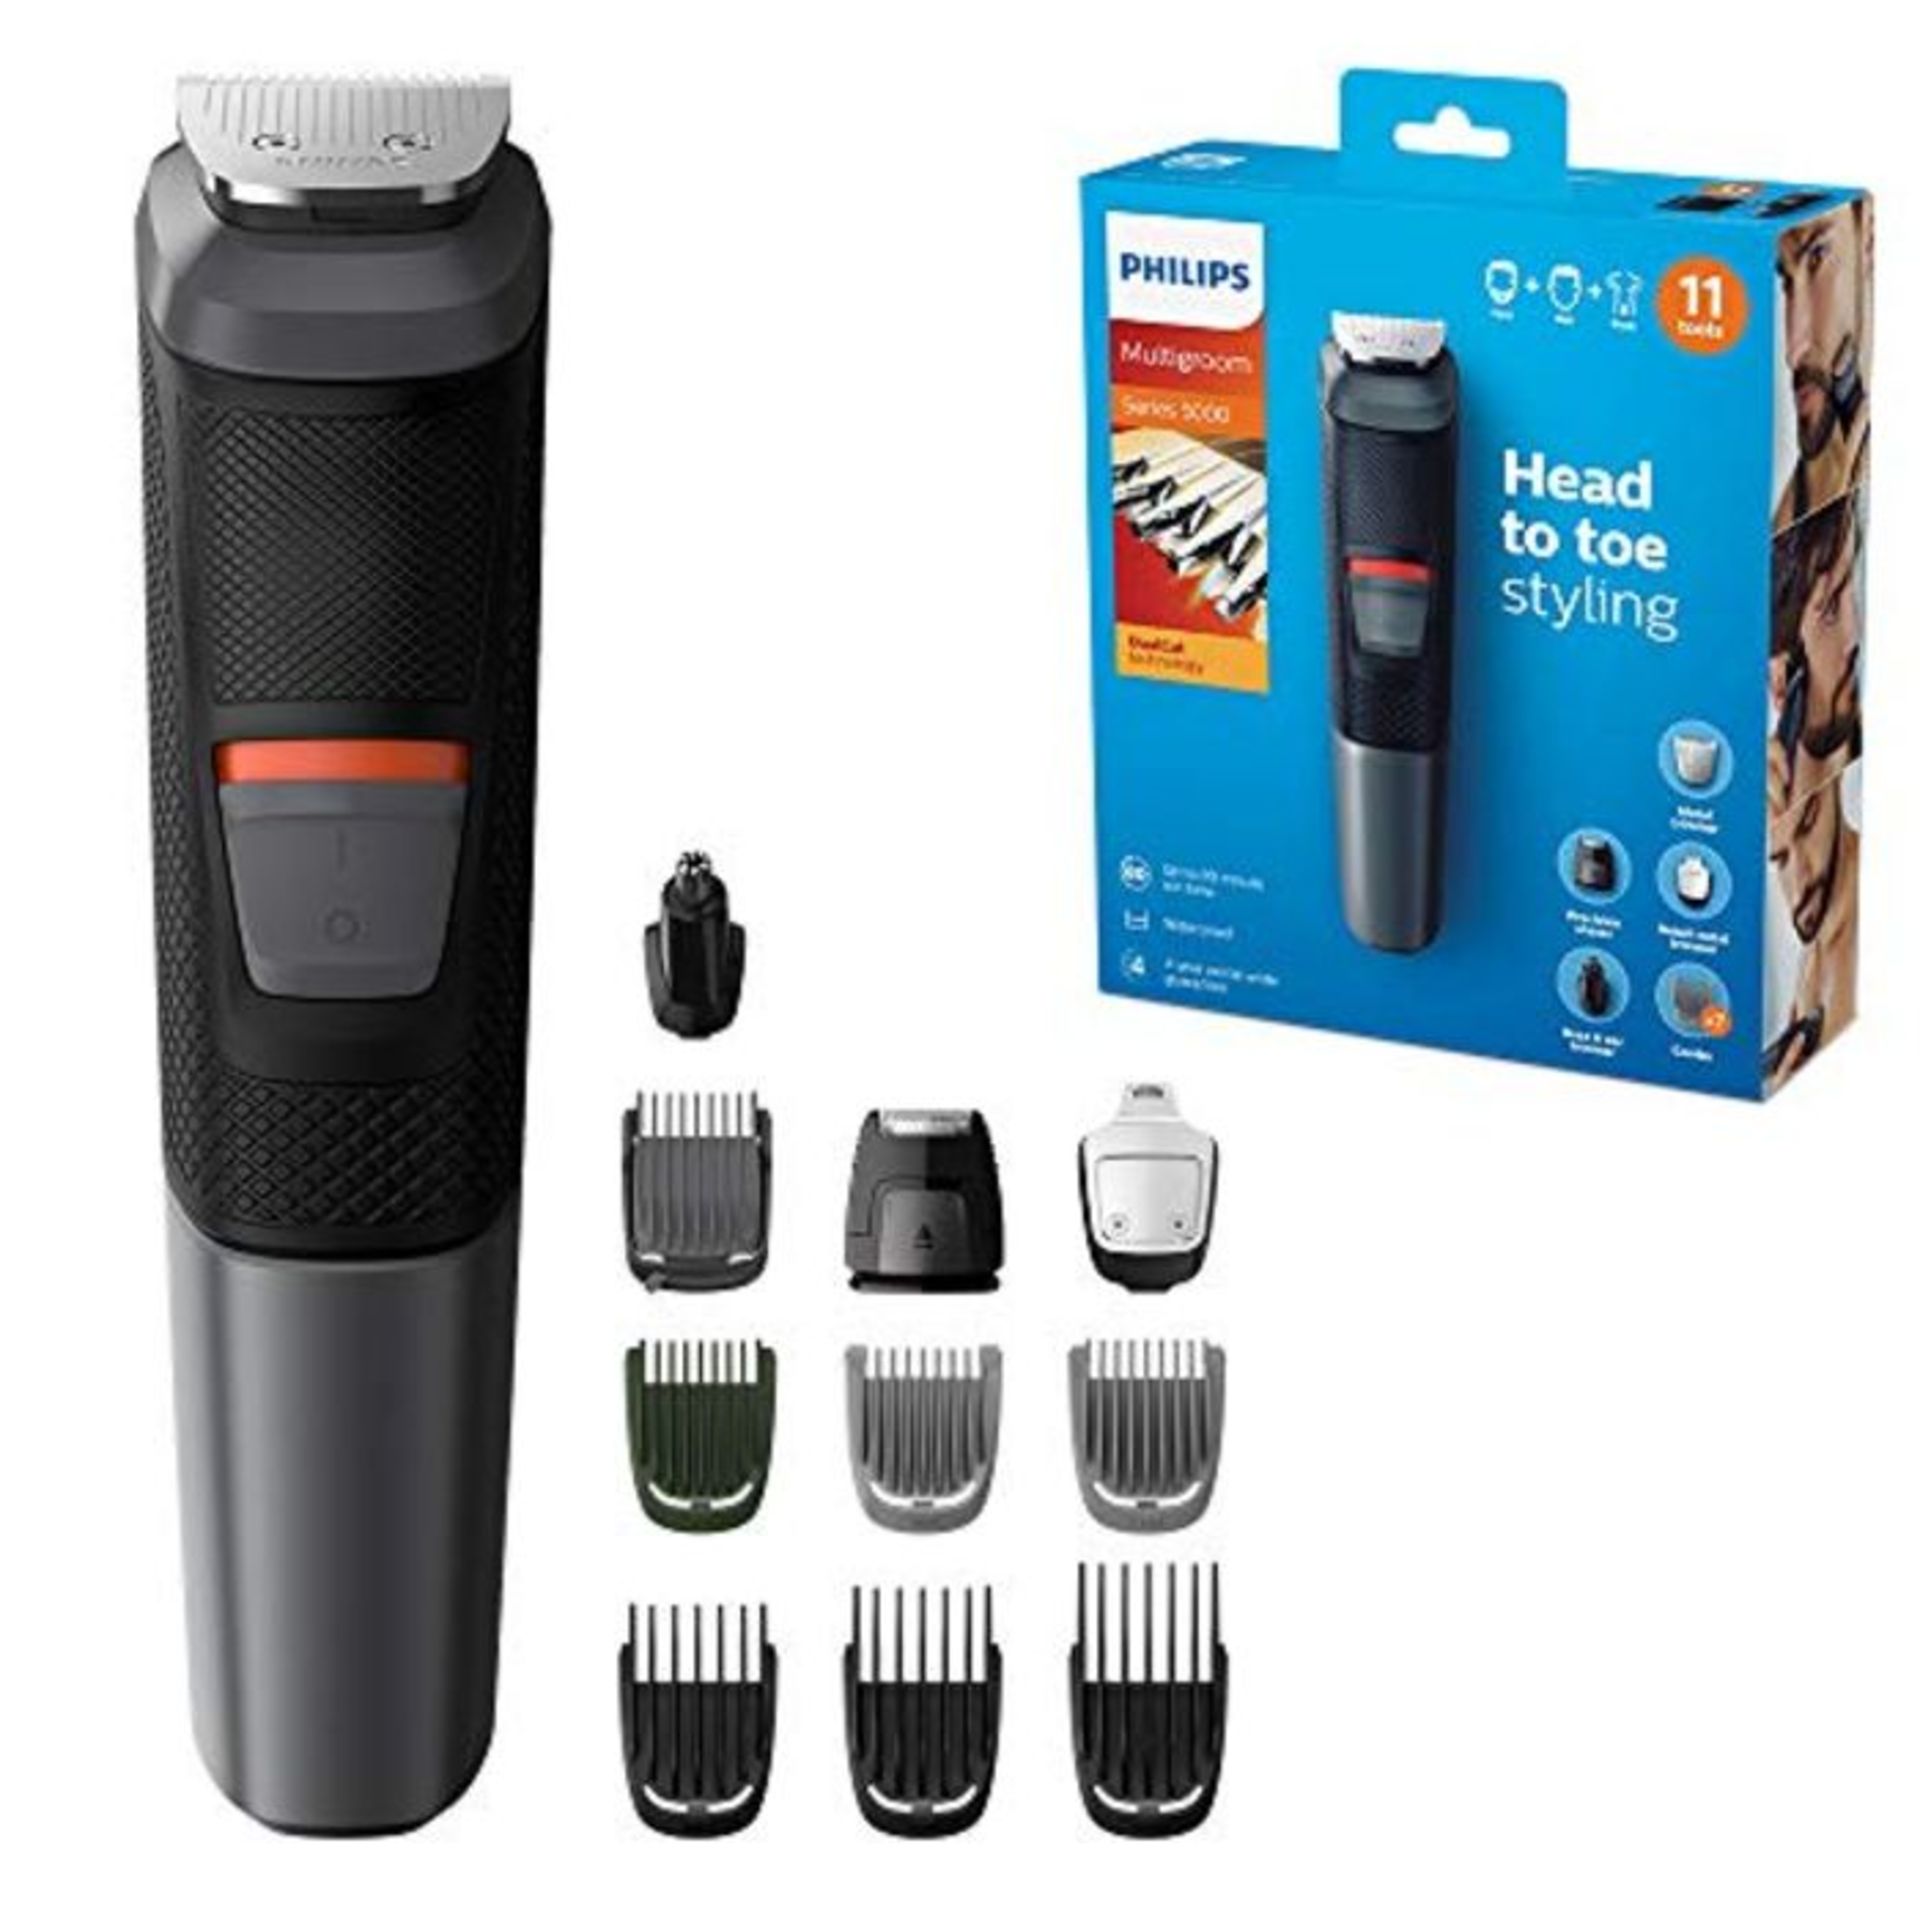 Philips 11-in-1 All-In-One Trimmer, Series 5000 Grooming Kit for Beard, Hair & Body wi